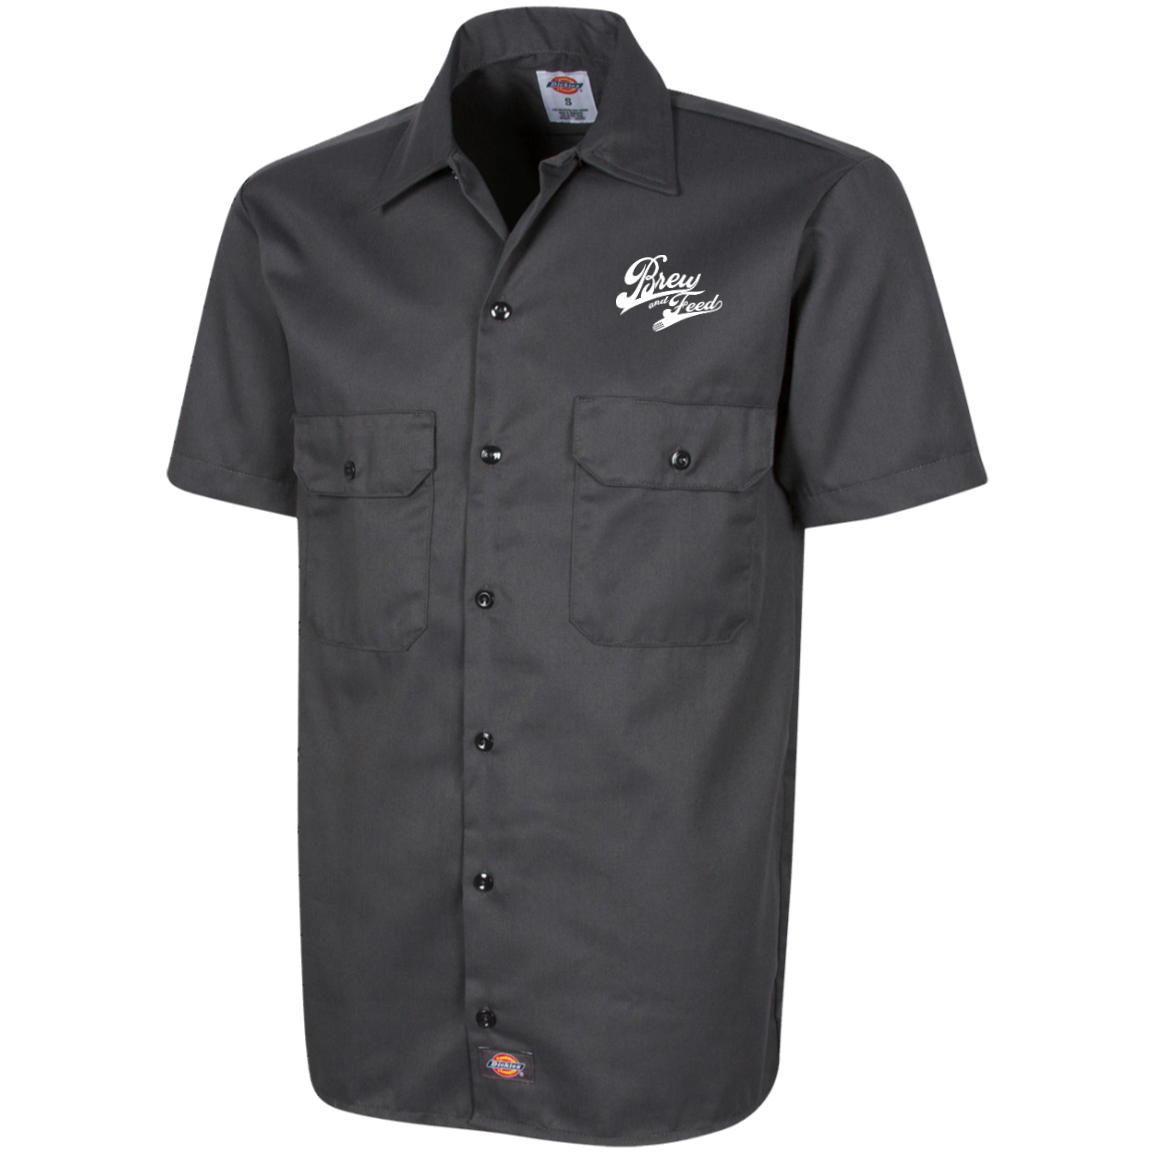 Brew and Feed Brewhouse Work Shirt - Charcoal / S - Charcoal / M - Charcoal / L - Charcoal / XL - Charcoal / 2XL - Charcoal / 3XL